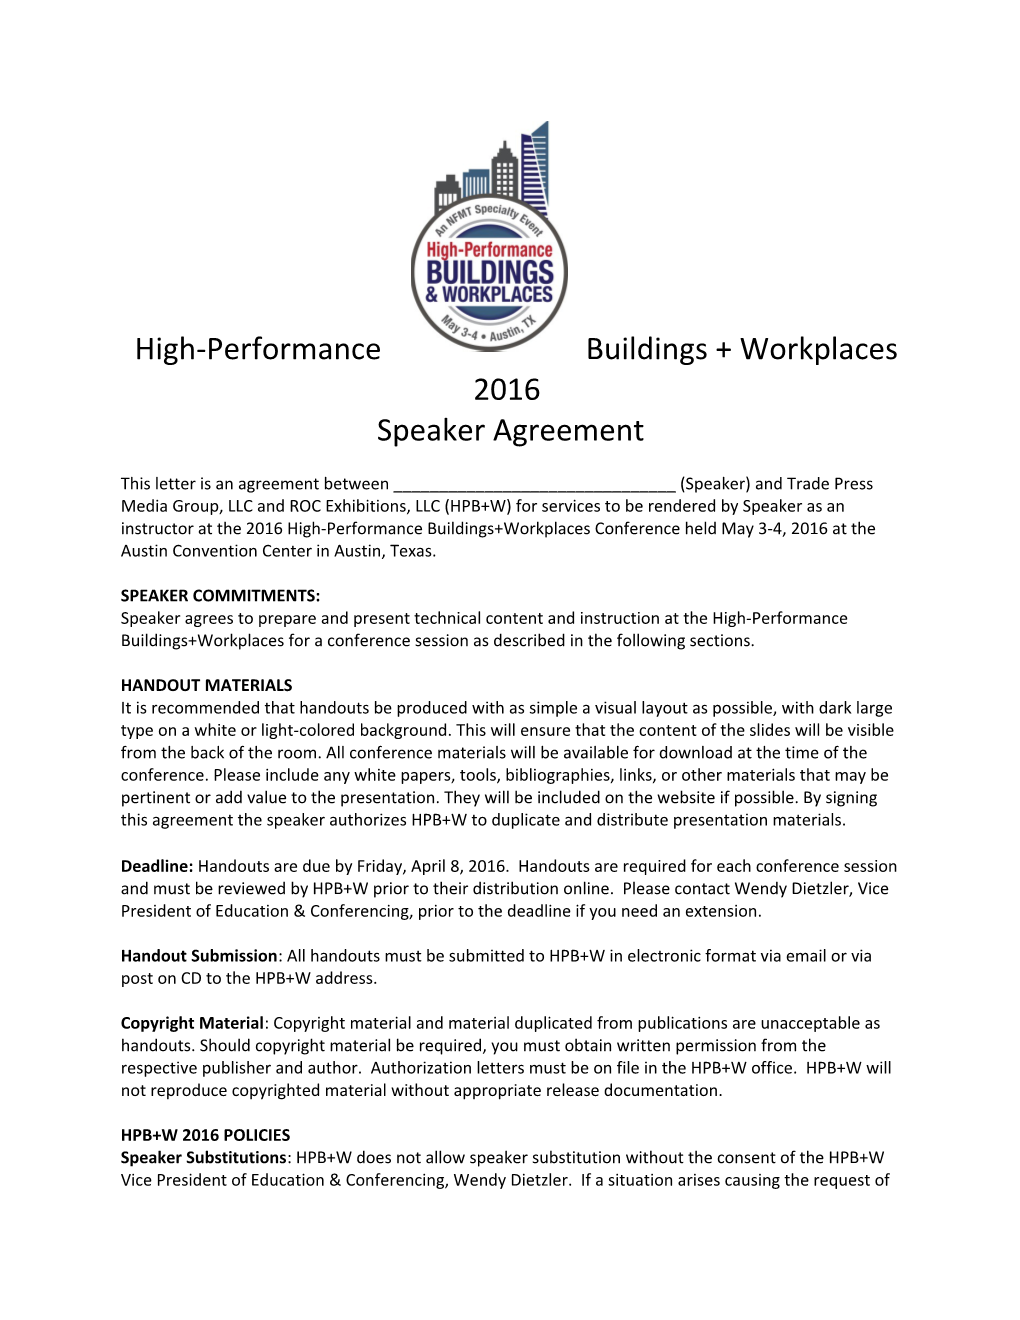 High-Performance Buildings + Workplaces 2016